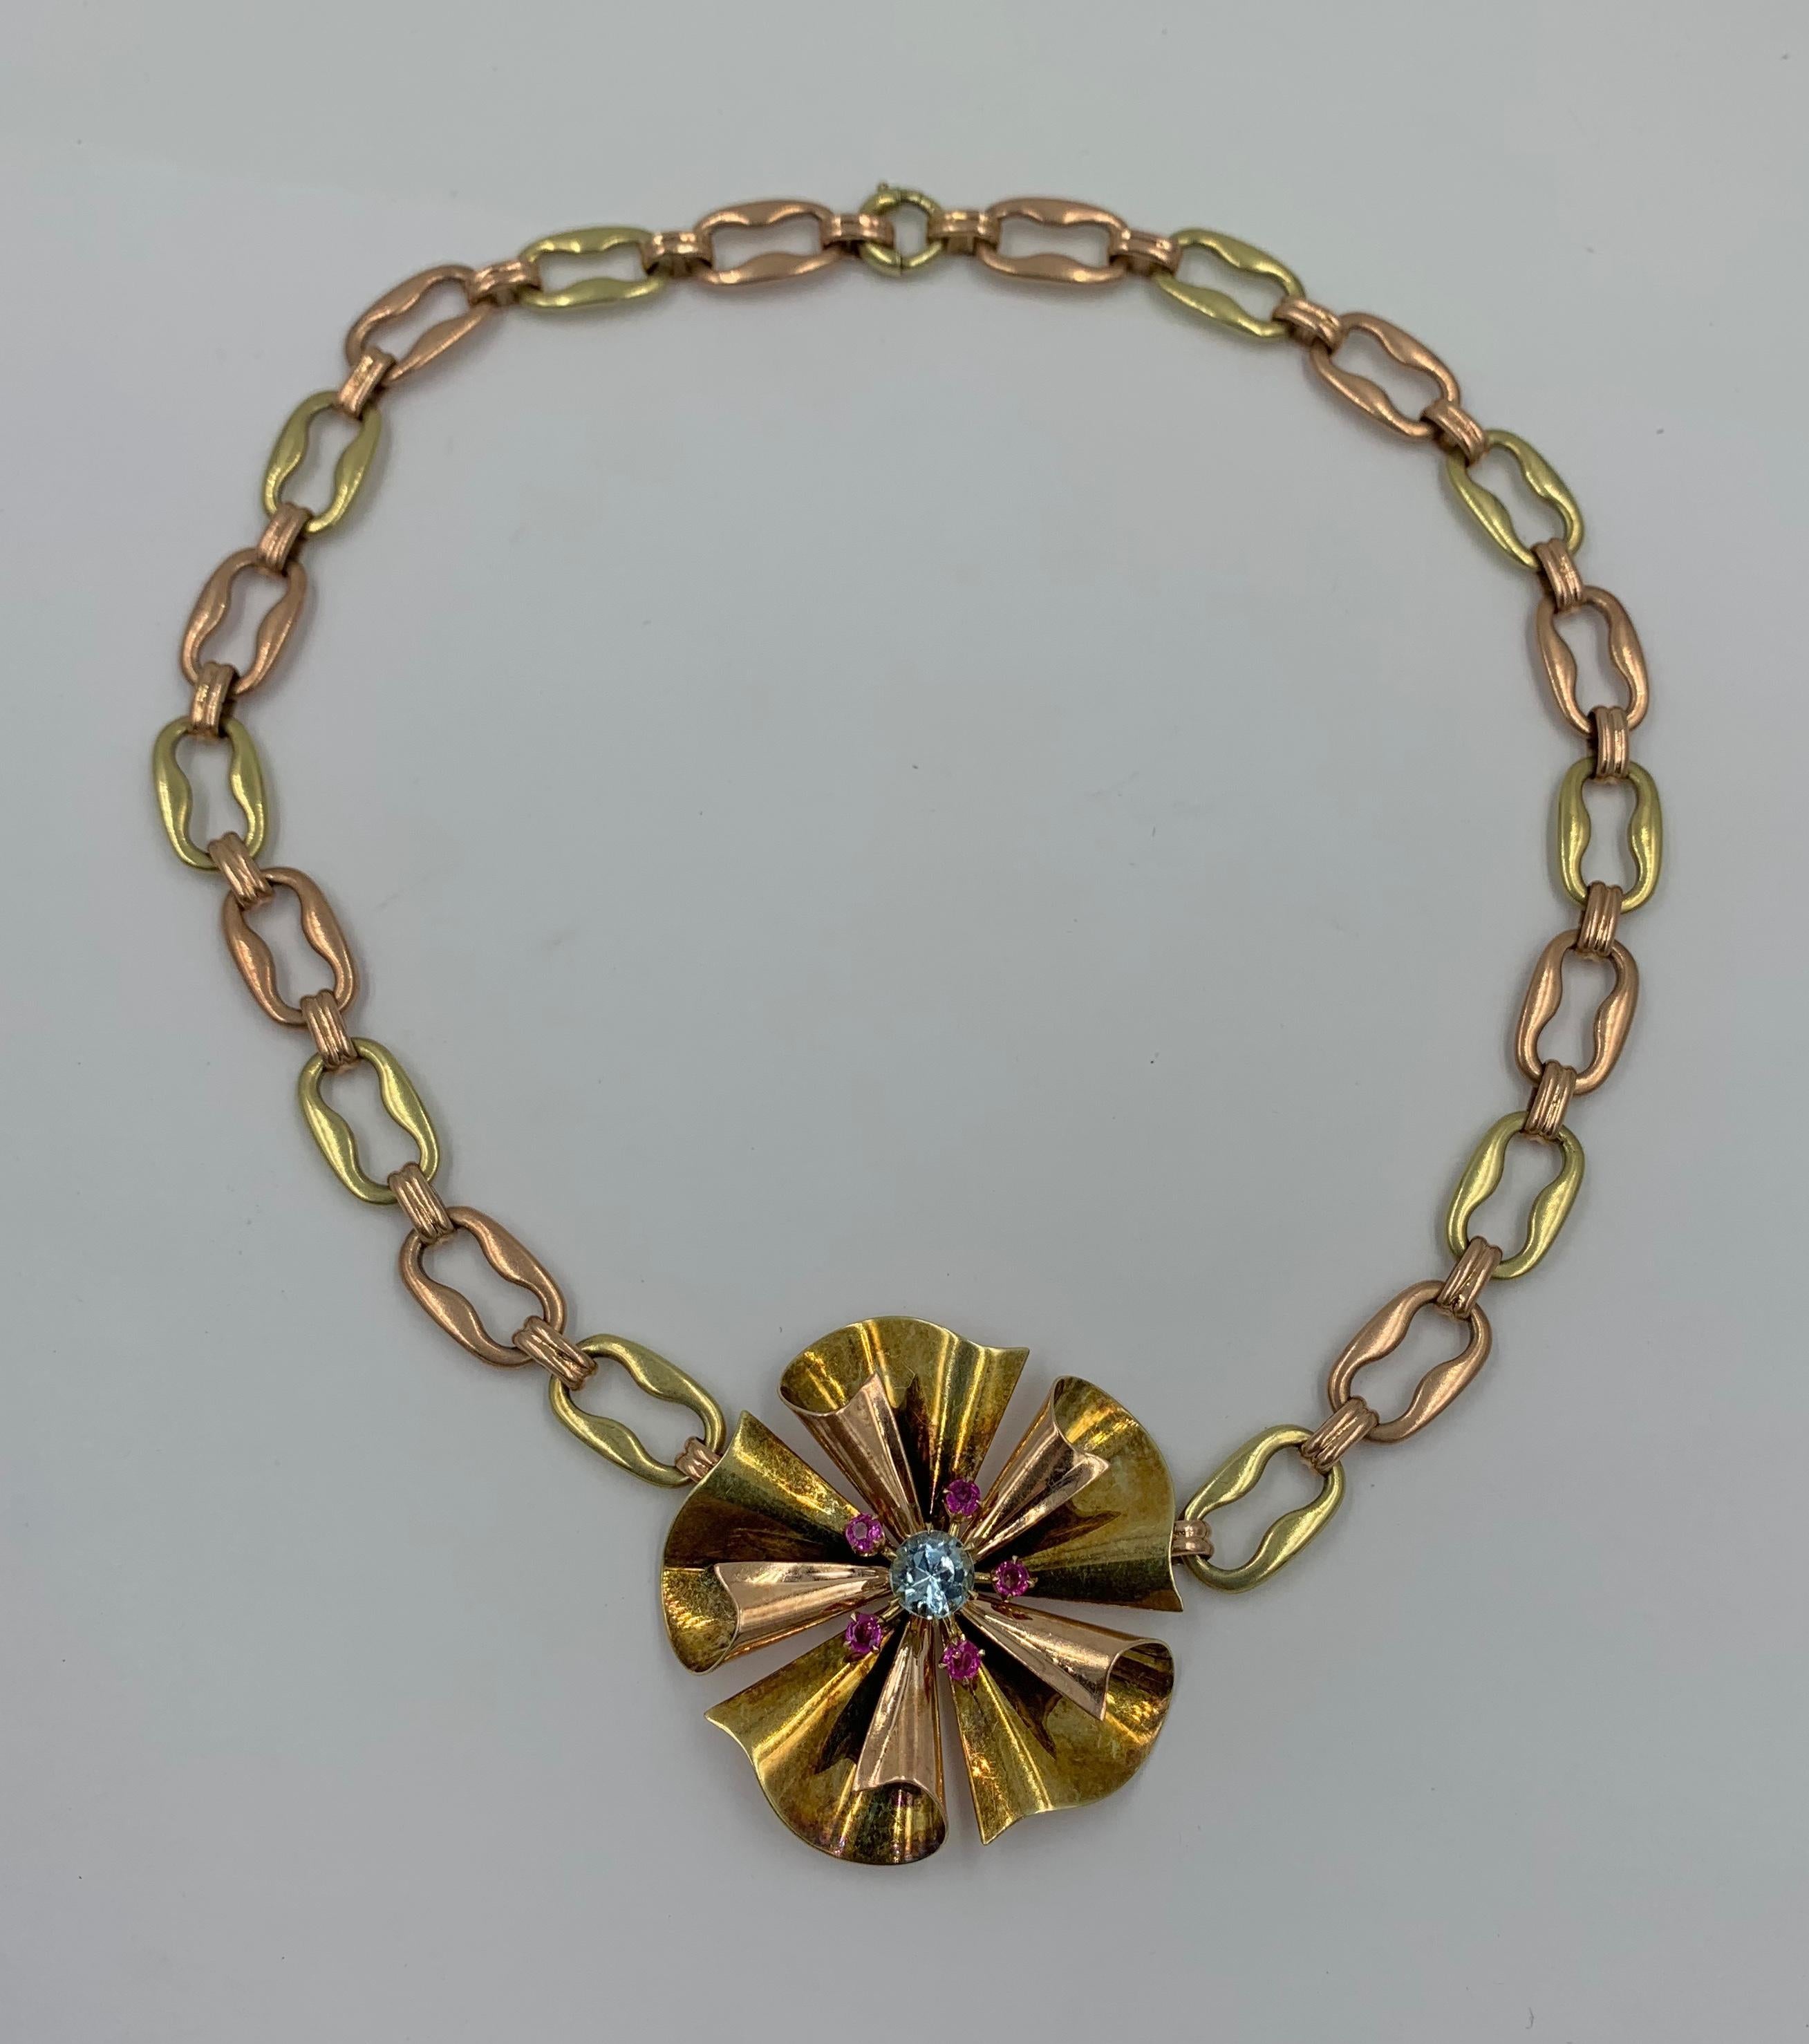 This is a stunning Retro Mid-Century stylized flower motif necklace set with a central 1 Carat Aquamarine and five round Rubies set in 14 Karat Pink Gold with a Yellow Gold Mariner Link Chain.  The fabulous Mid-Century necklace has wonderful Retro